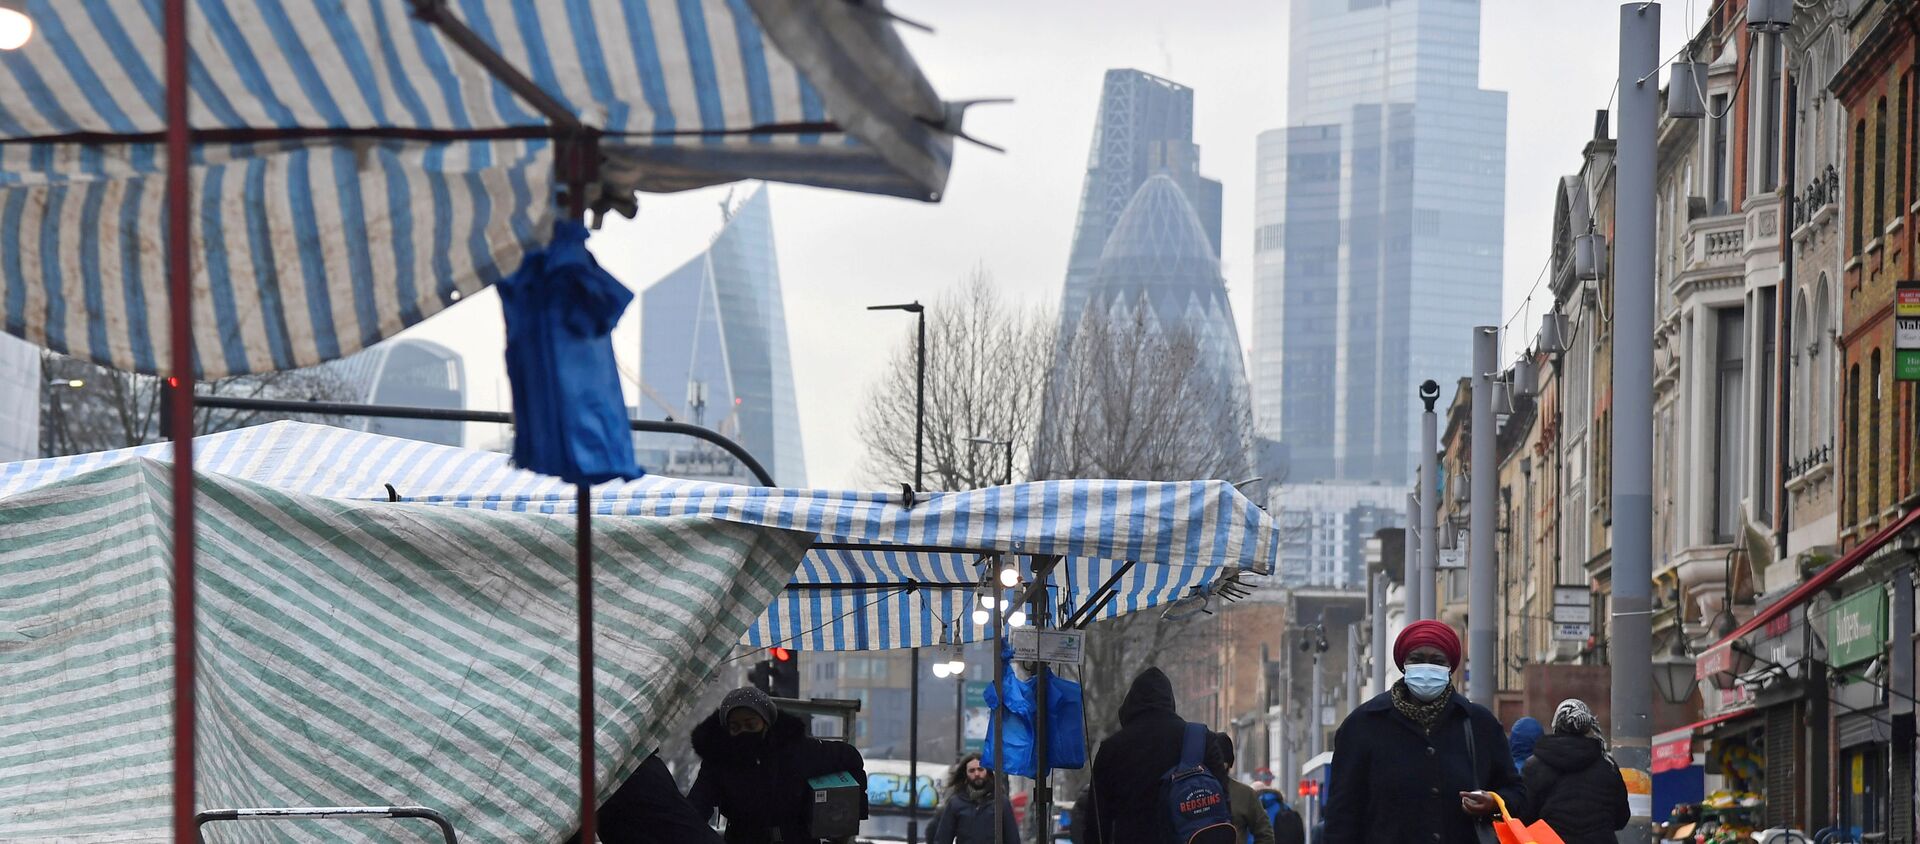 FILE PHOTO: People shop at market stalls, with skyscrapers of the CIty of London financial district seen behind, amid the coronavirus disease (COVID-19) pandemic, in London, Britain, January 15, 2021. REUTERS/Toby Melville/File Photo - Sputnik International, 1920, 28.02.2021